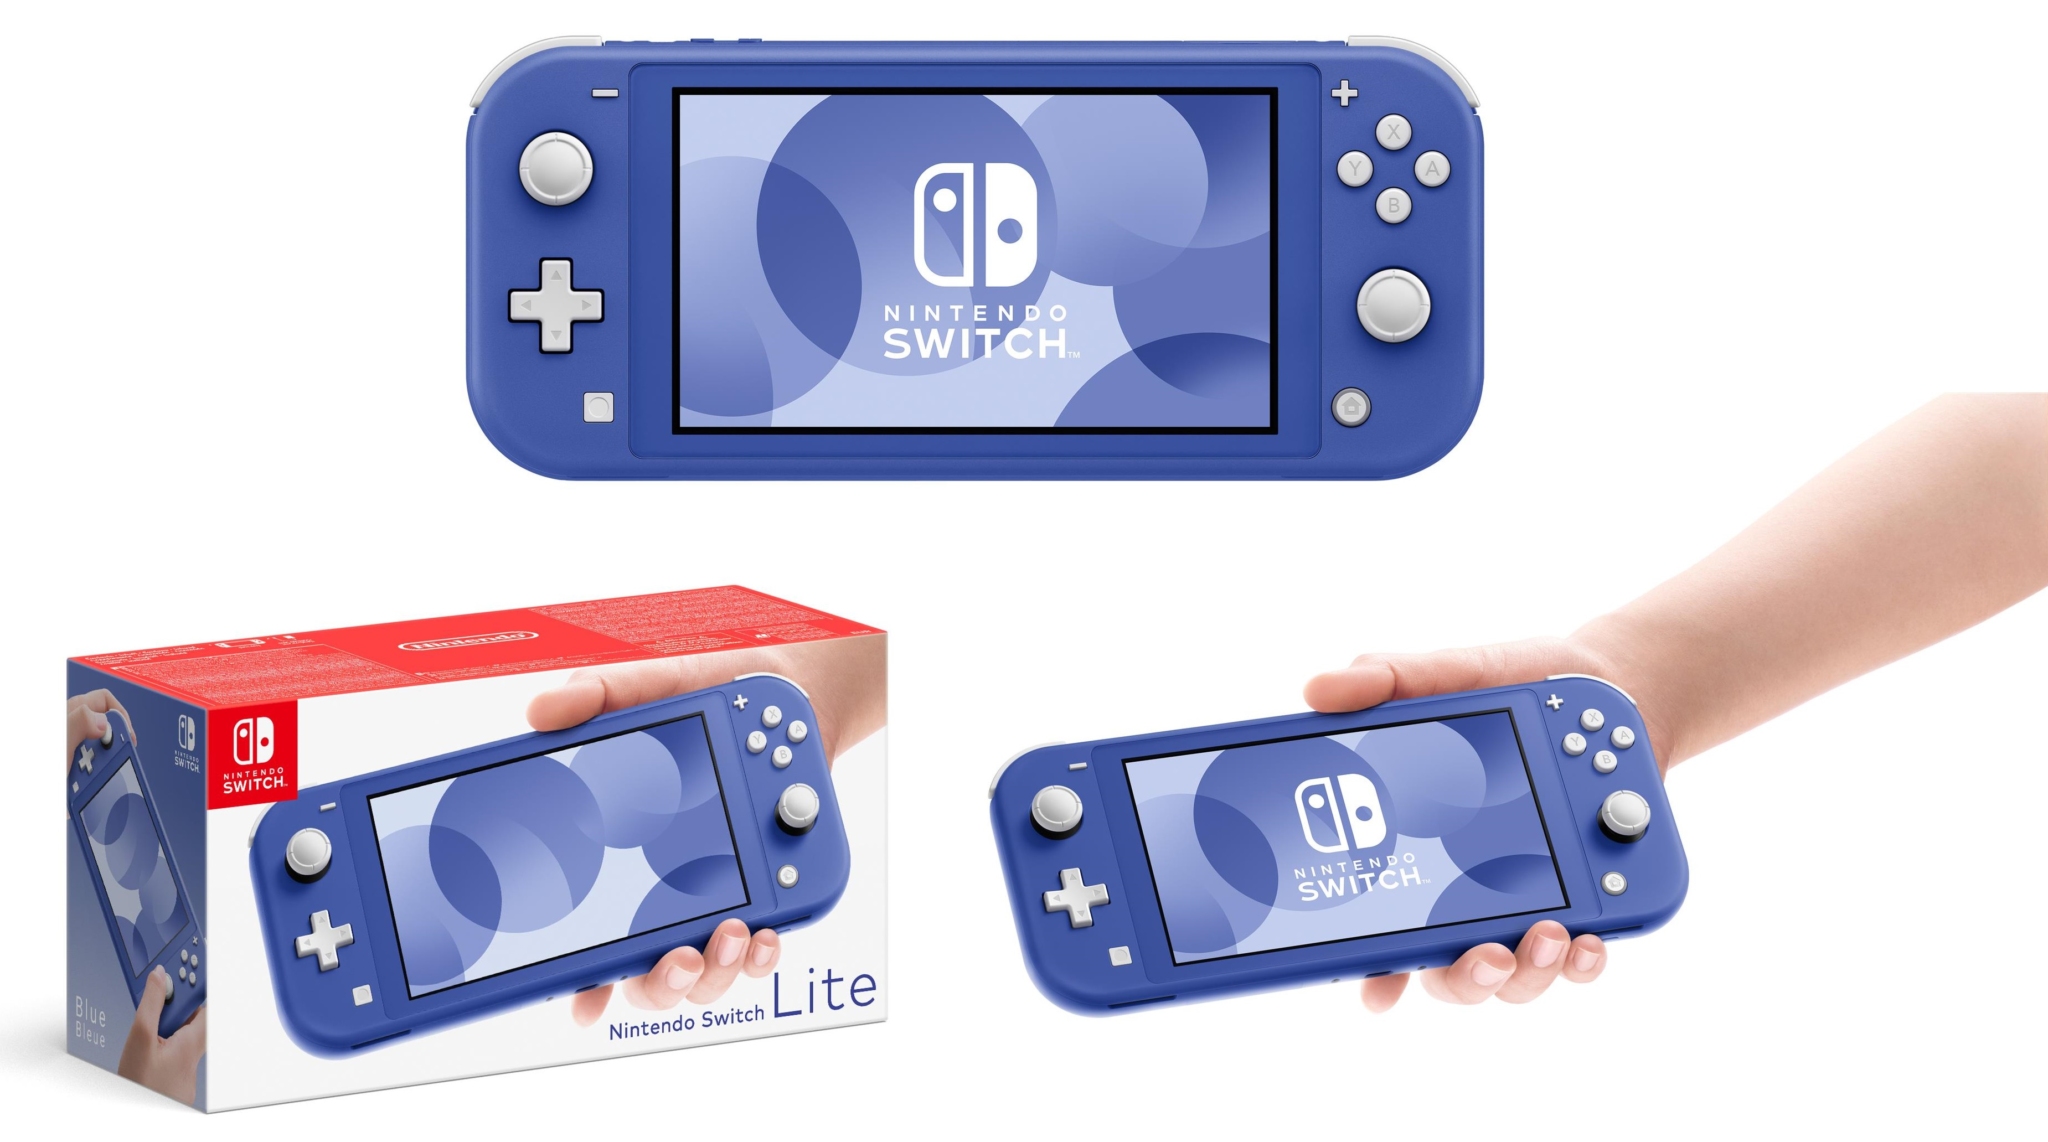 https://www.reference-gaming.com/assets/media/product/132541/console-switch-lite-blue.jpg?format=product-cover-large&k=1620169578